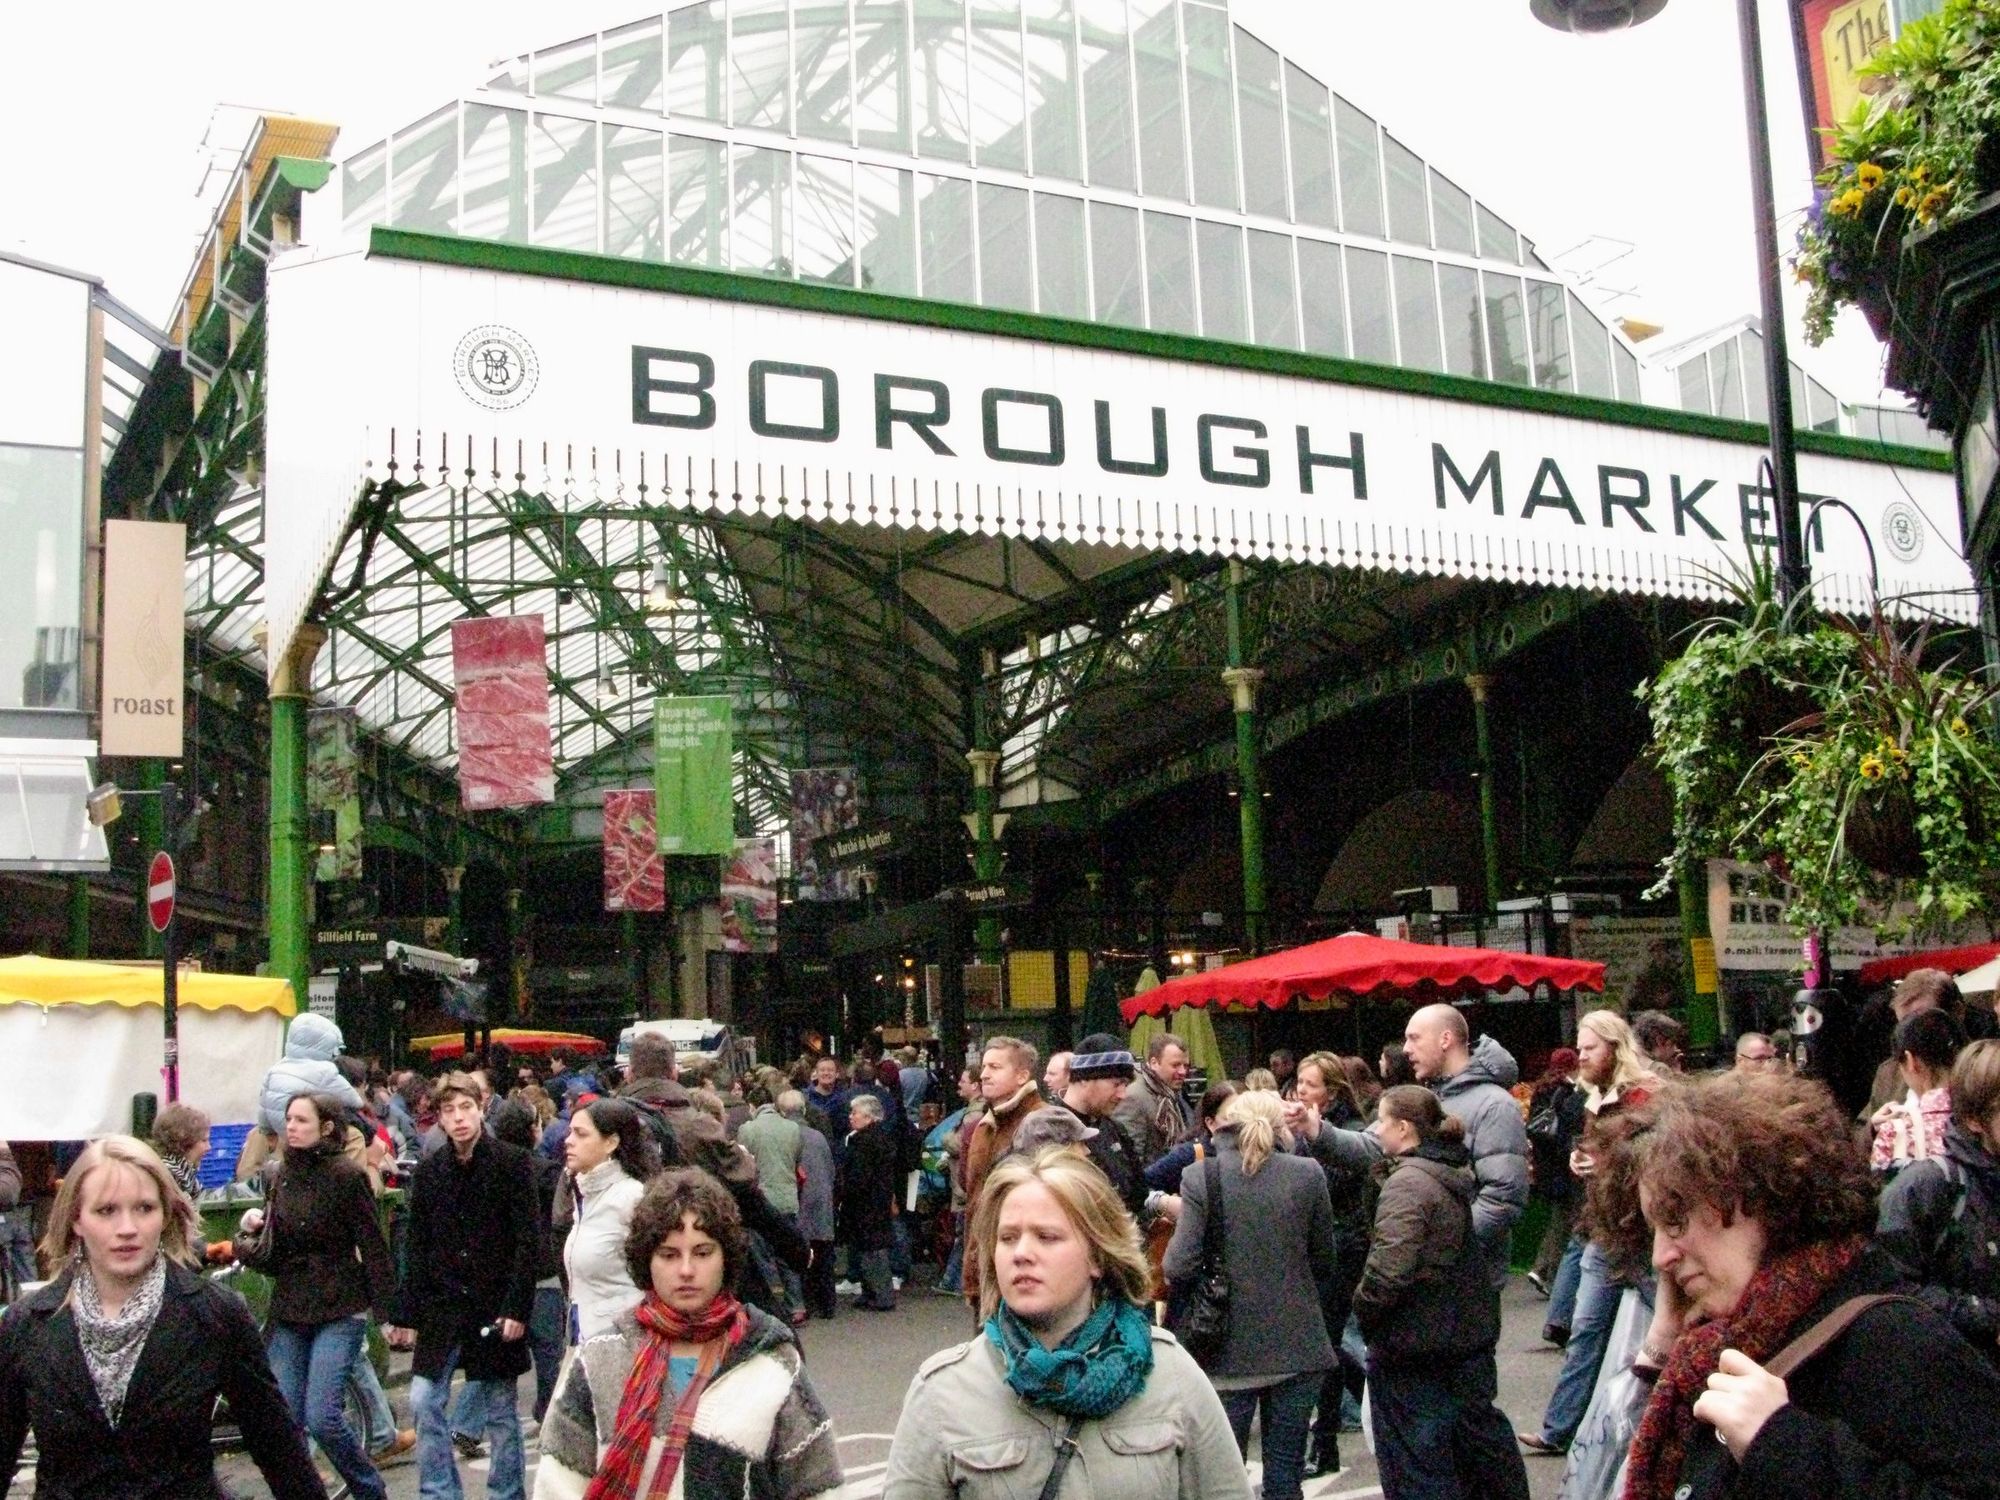 London's Borough Market: A Public Market Driven by and for Social Life